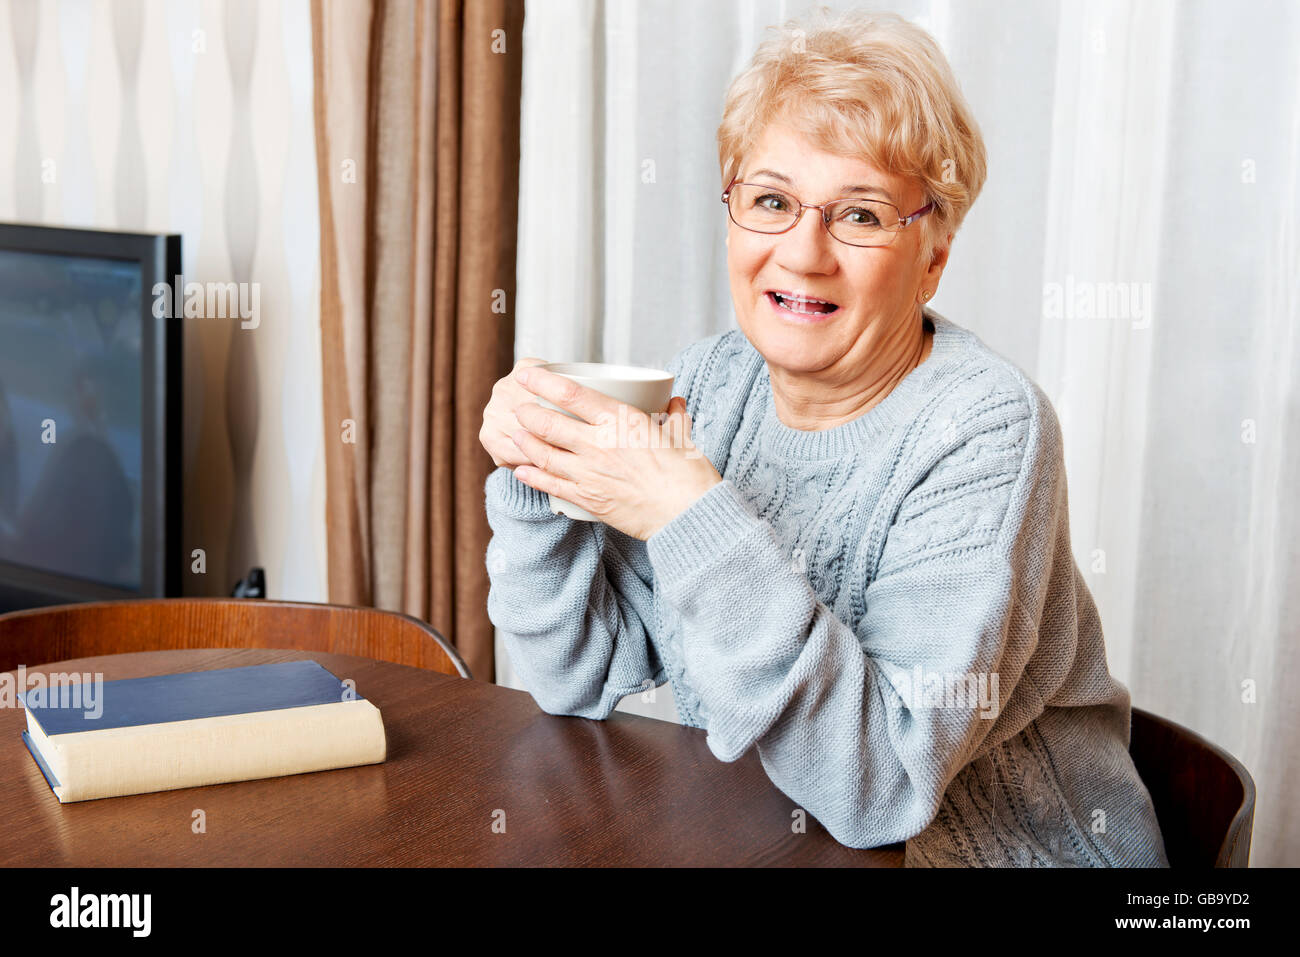 Senior woman sitting at the desk with book and drinking tea or coffee Stock Photo